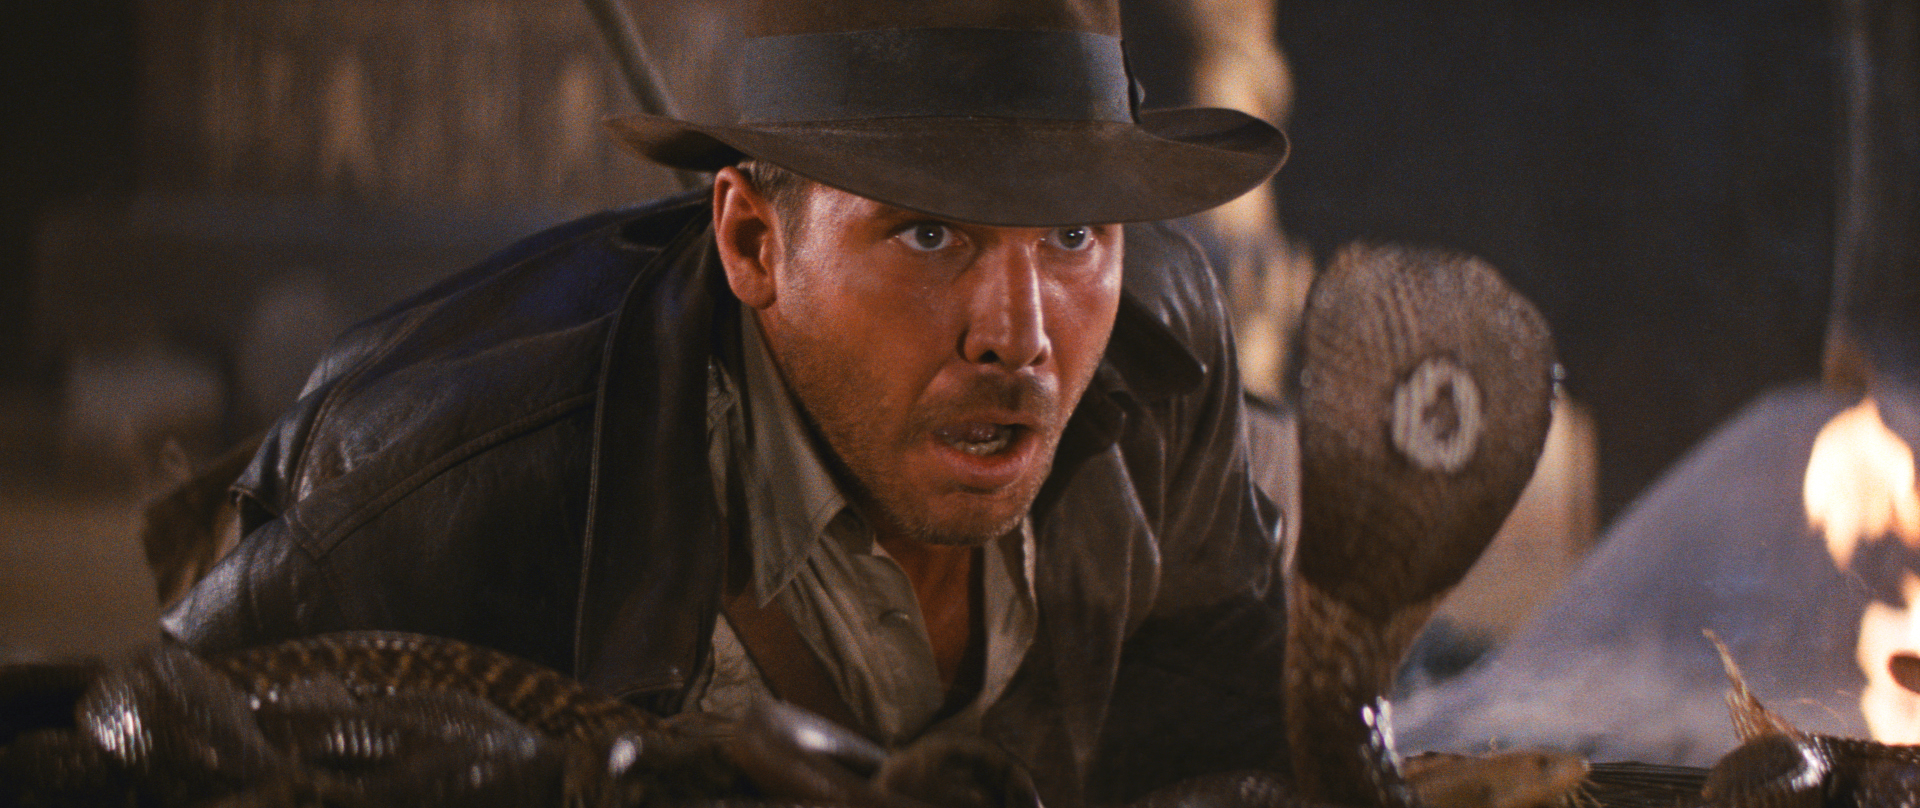 Raiders Of The Lost Ark Backgrounds, Compatible - PC, Mobile, Gadgets| 1920x808 px